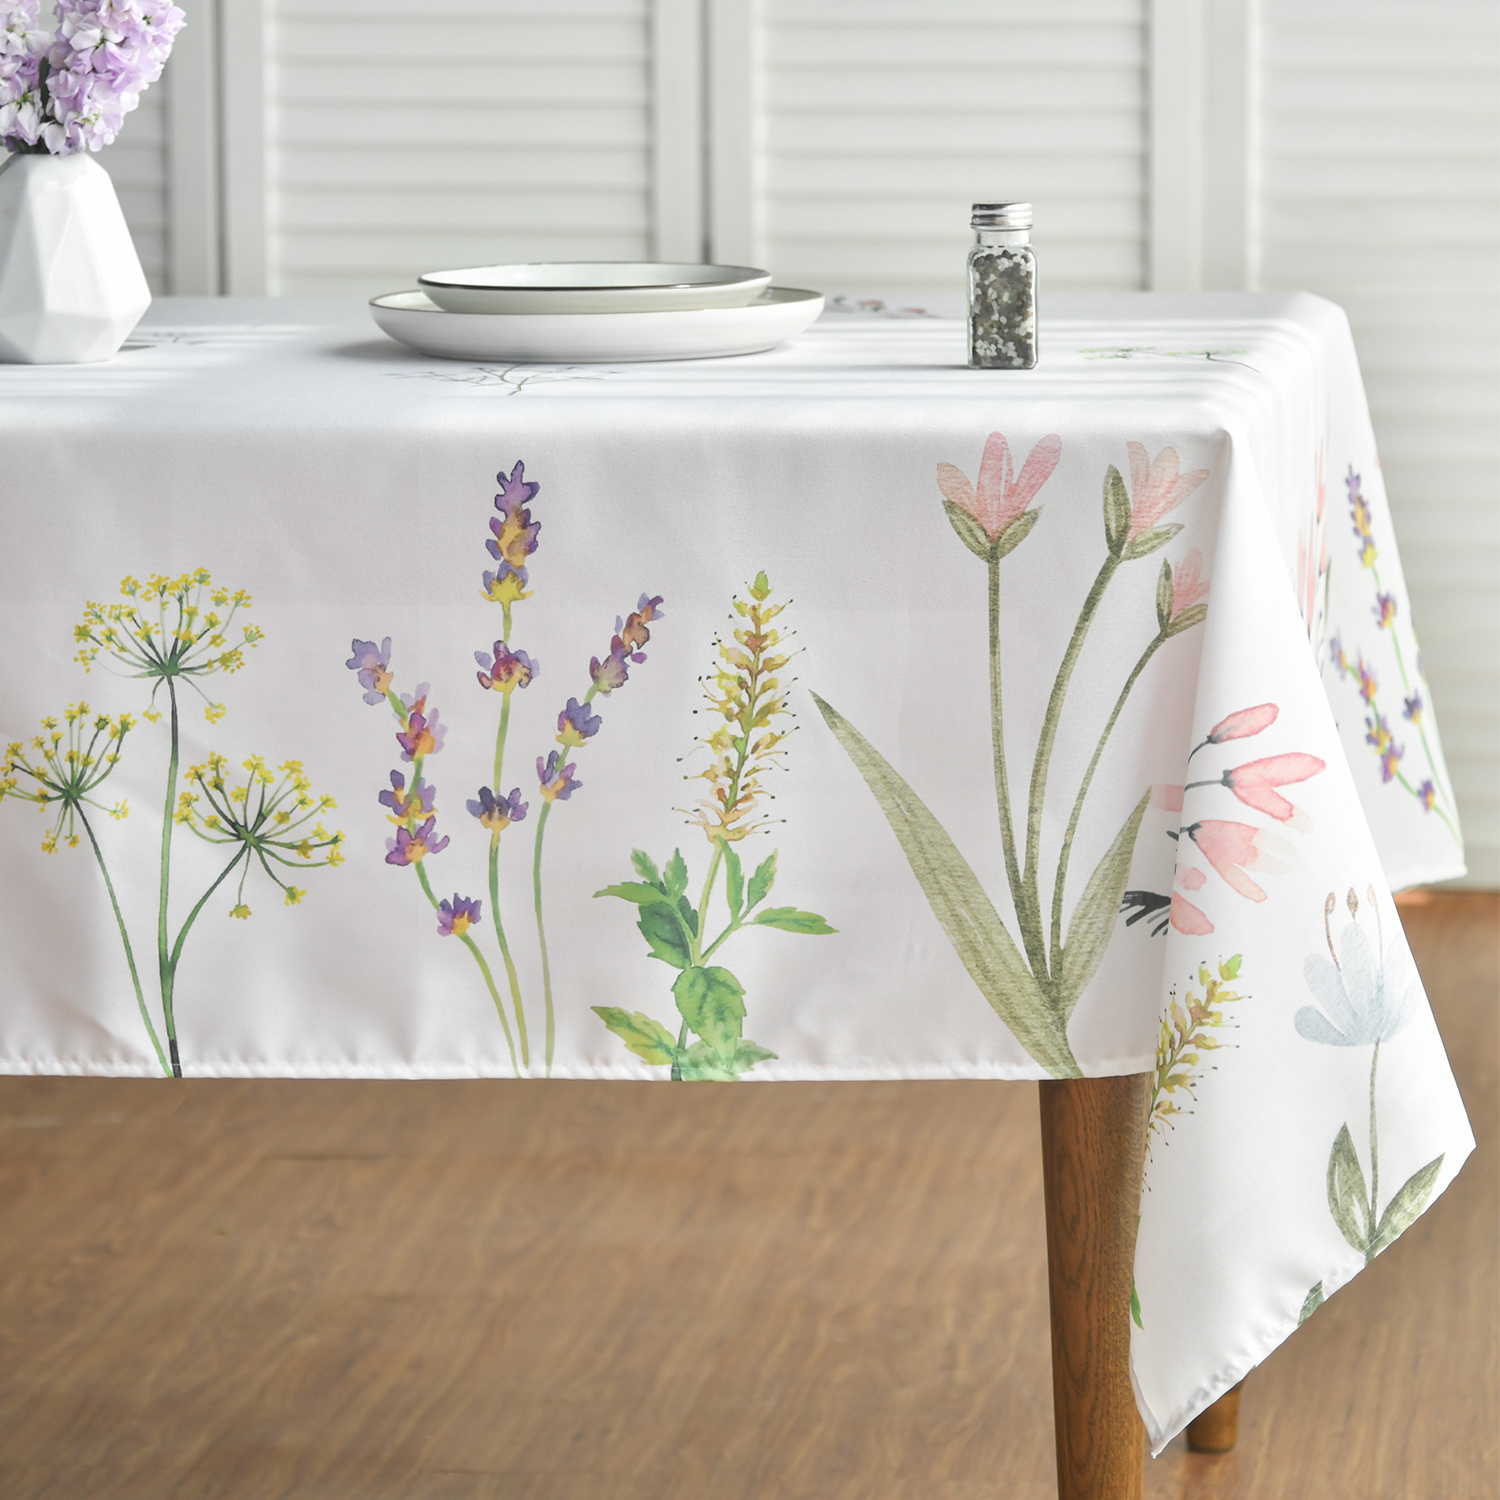 

Sm:)e Spring Tablecloth, Wildflowers Floral Herbs Elegant Washable Table Cover For Party Picnic Dinner Decor